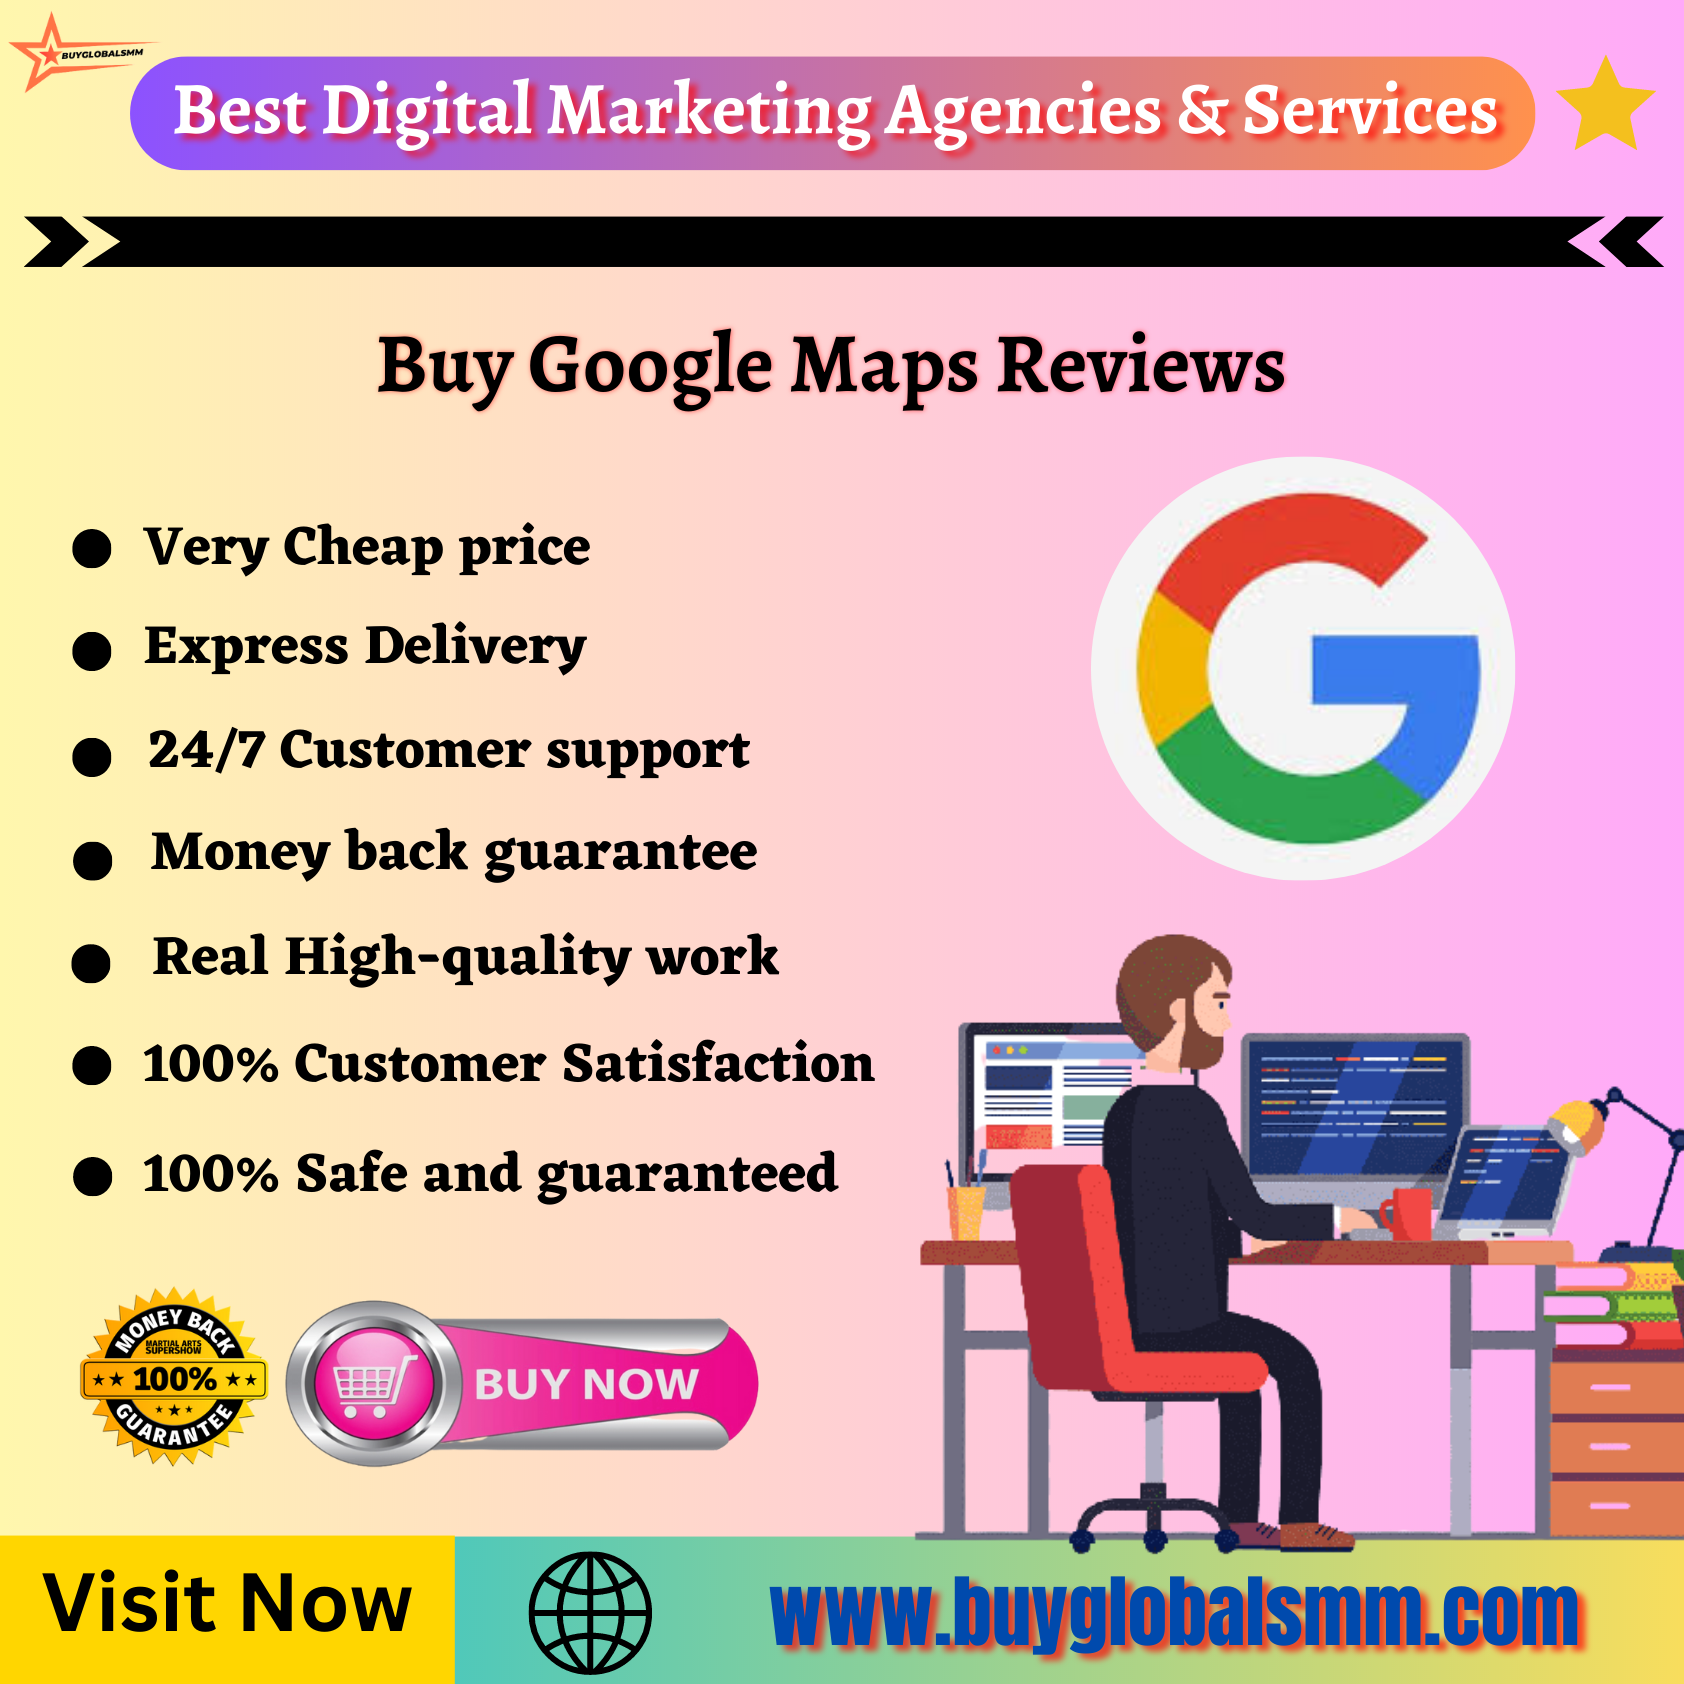 Buy Google Maps Reviews-100% trusted service, and cheap...